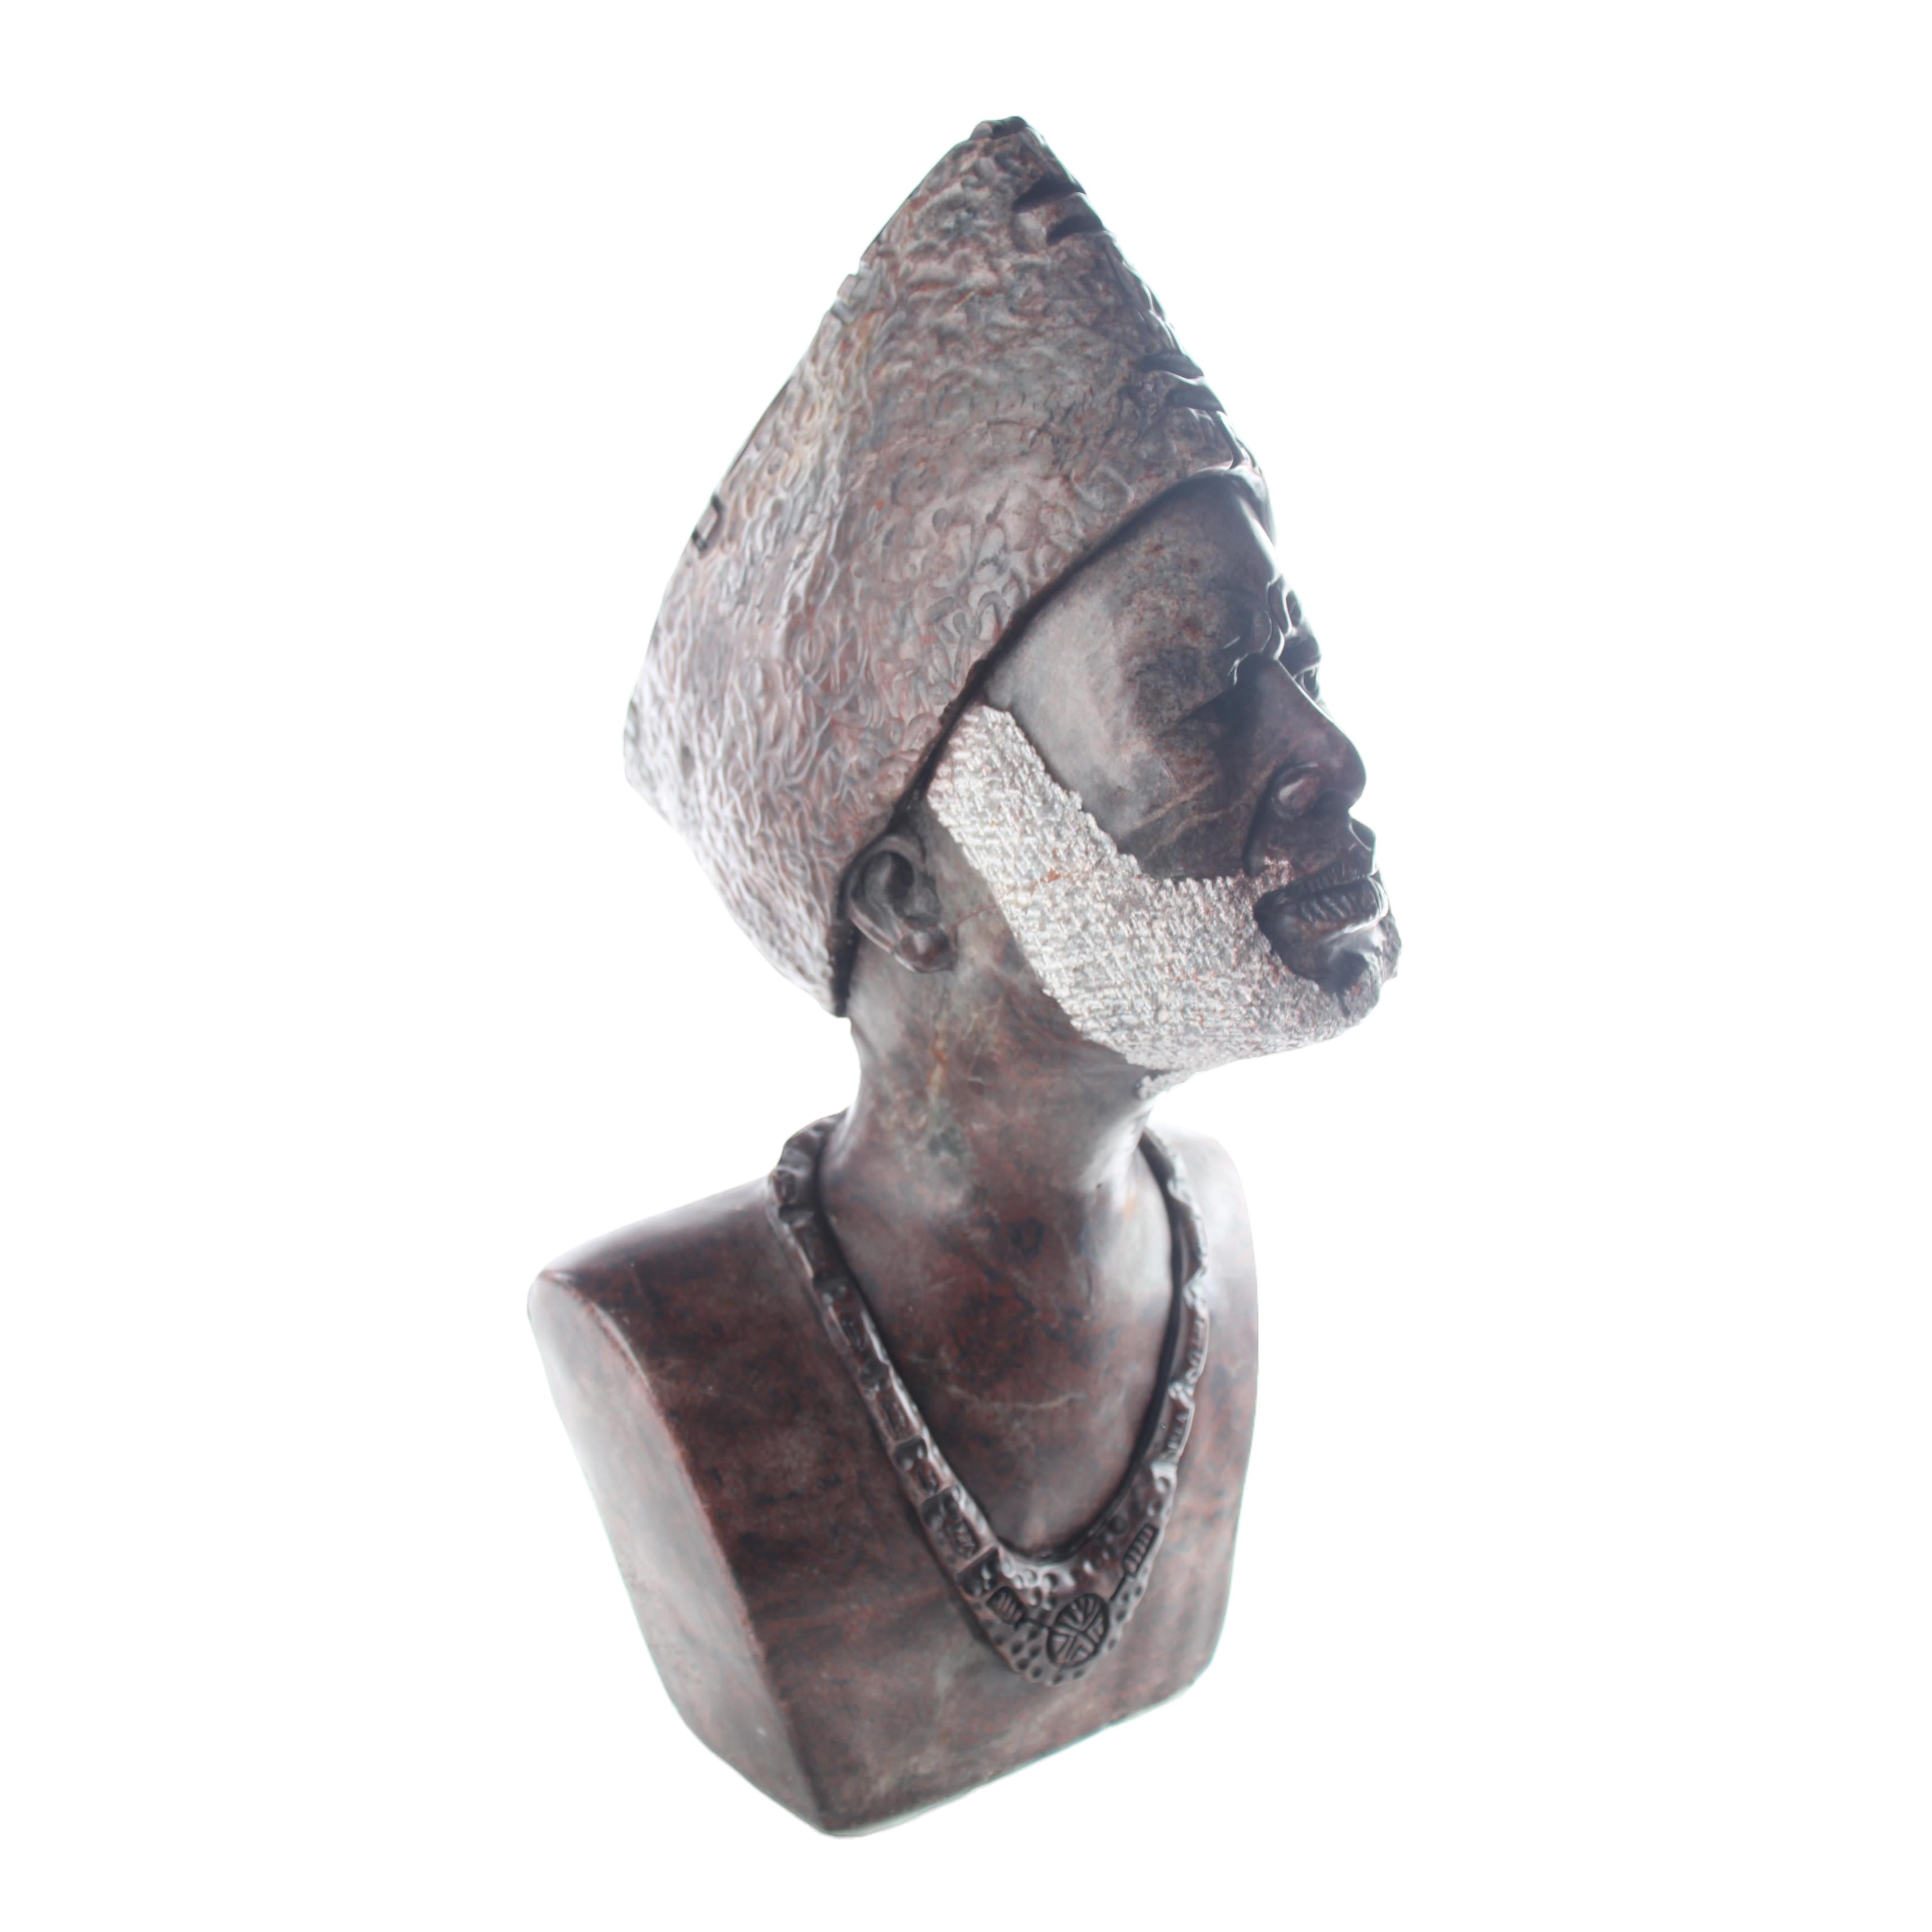 Shona Tribe Serpentine Stone Busts ~18.5" Tall - Busts